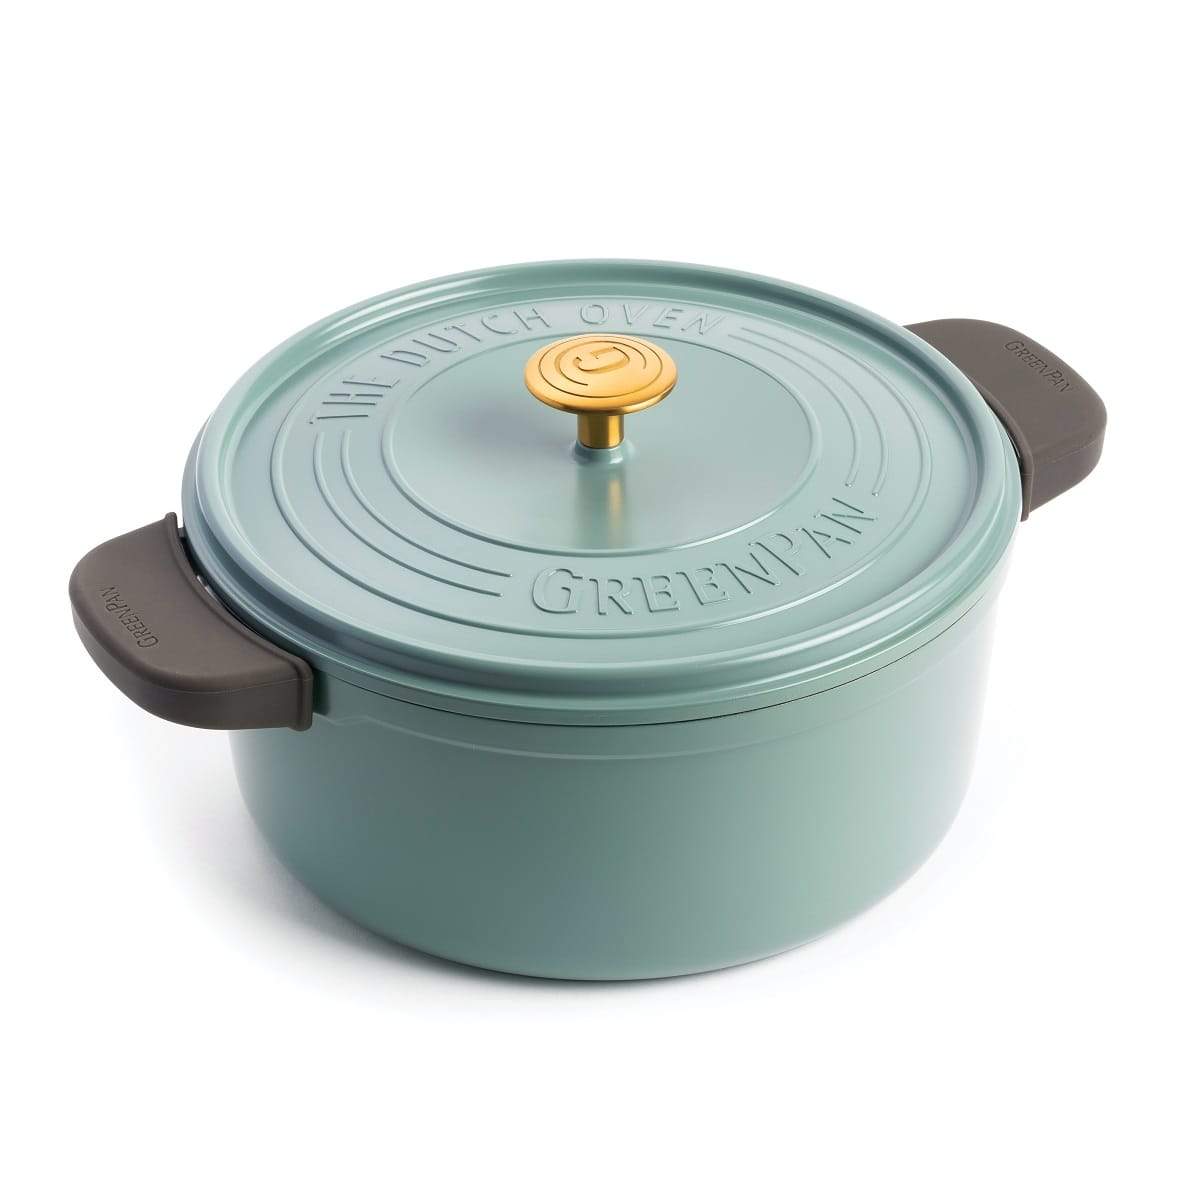 CC005542-001 - Featherweights Casserole with Lid, Smokey Sky Blue - 24cm - Product Image 3